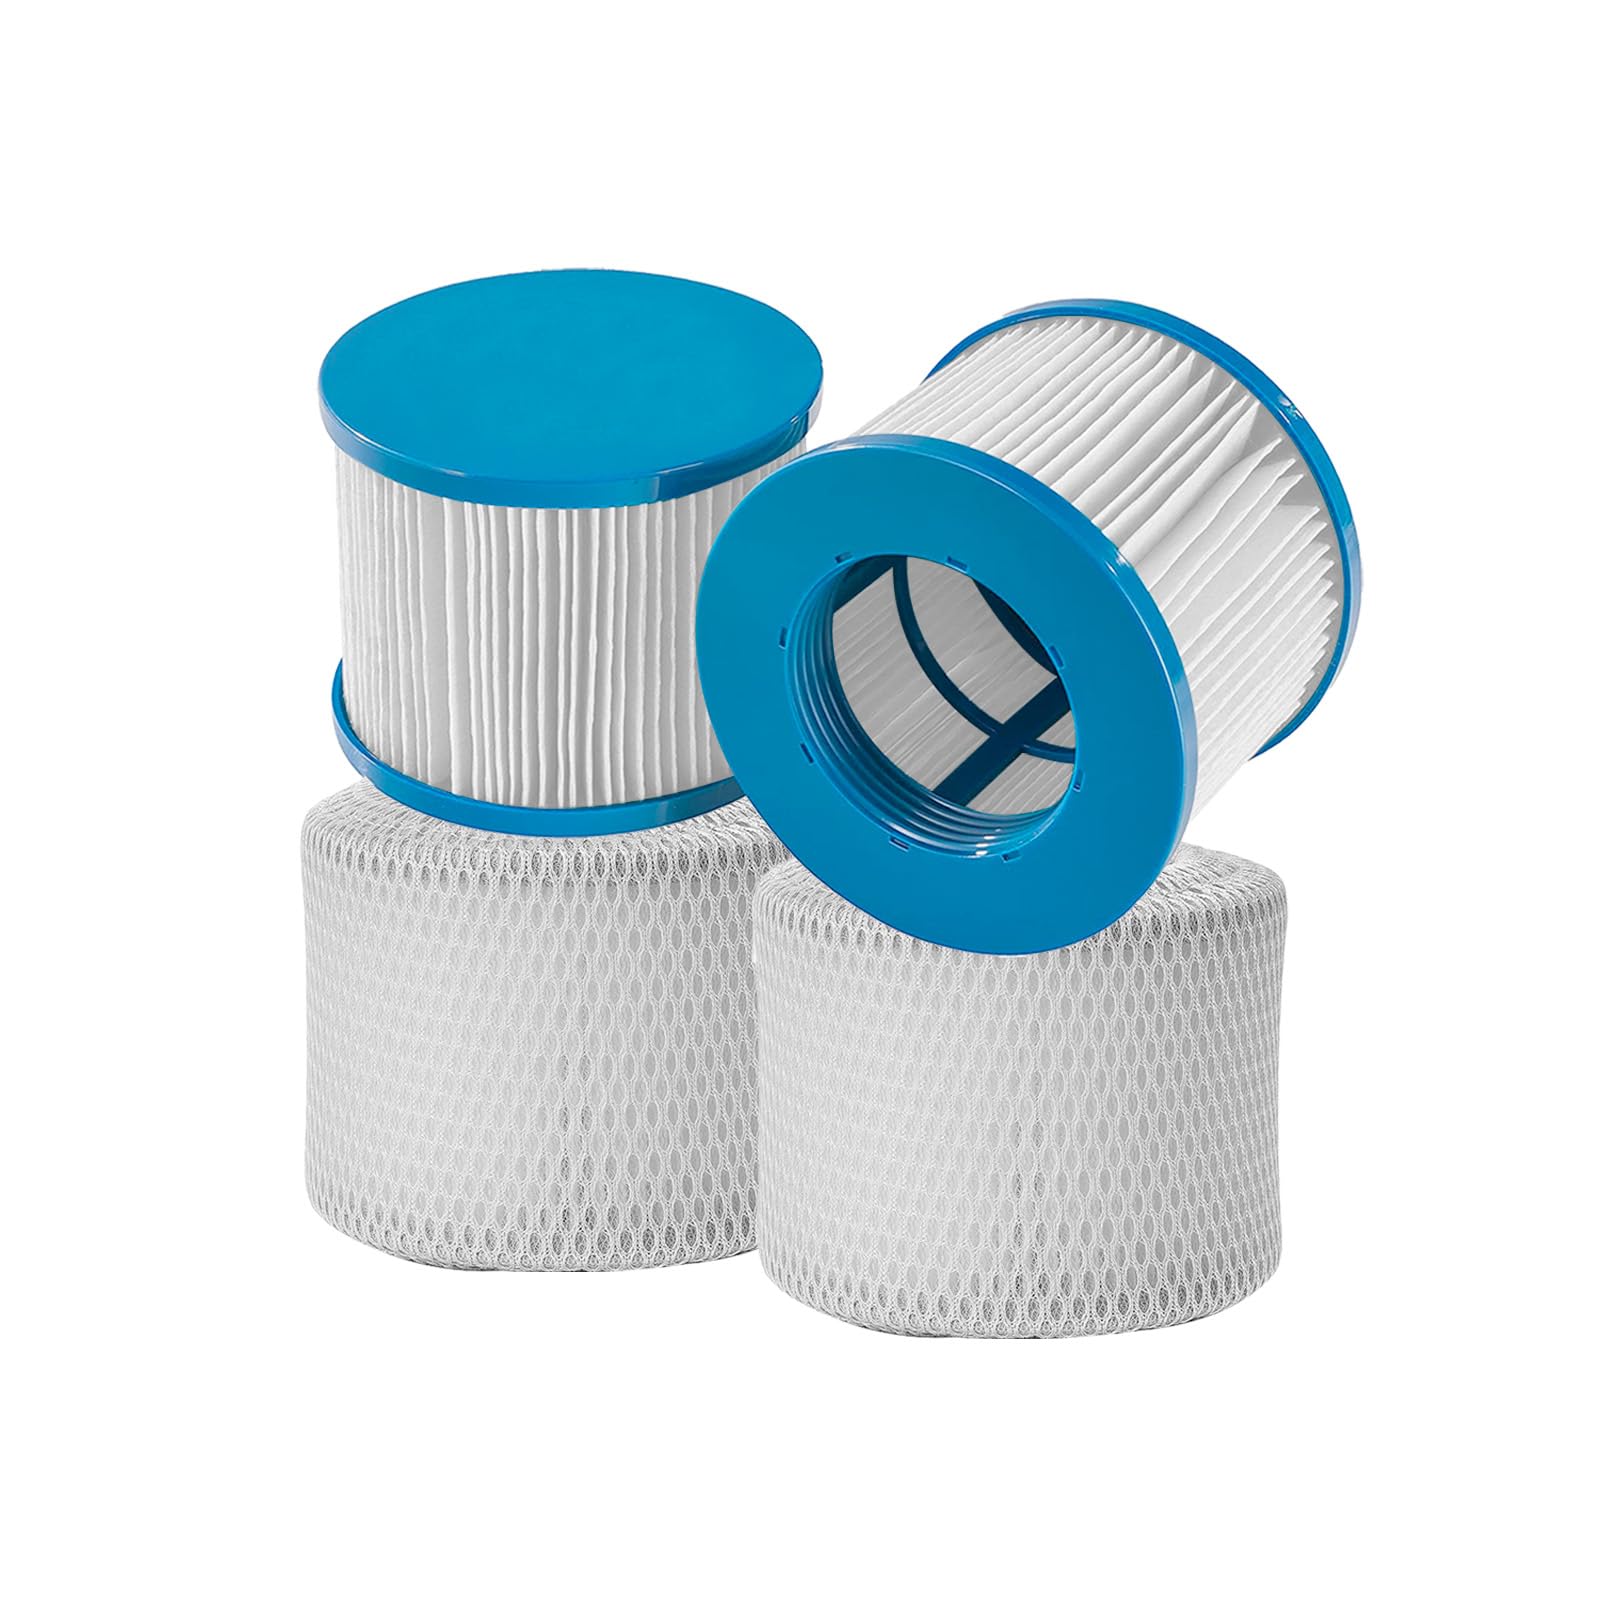 Relxtime 2 Pack Spa Filter Replacement, Pool Filters Hot Tub Filter Cartridges, Compatible With Inflatable Tubs Filtration, Blue